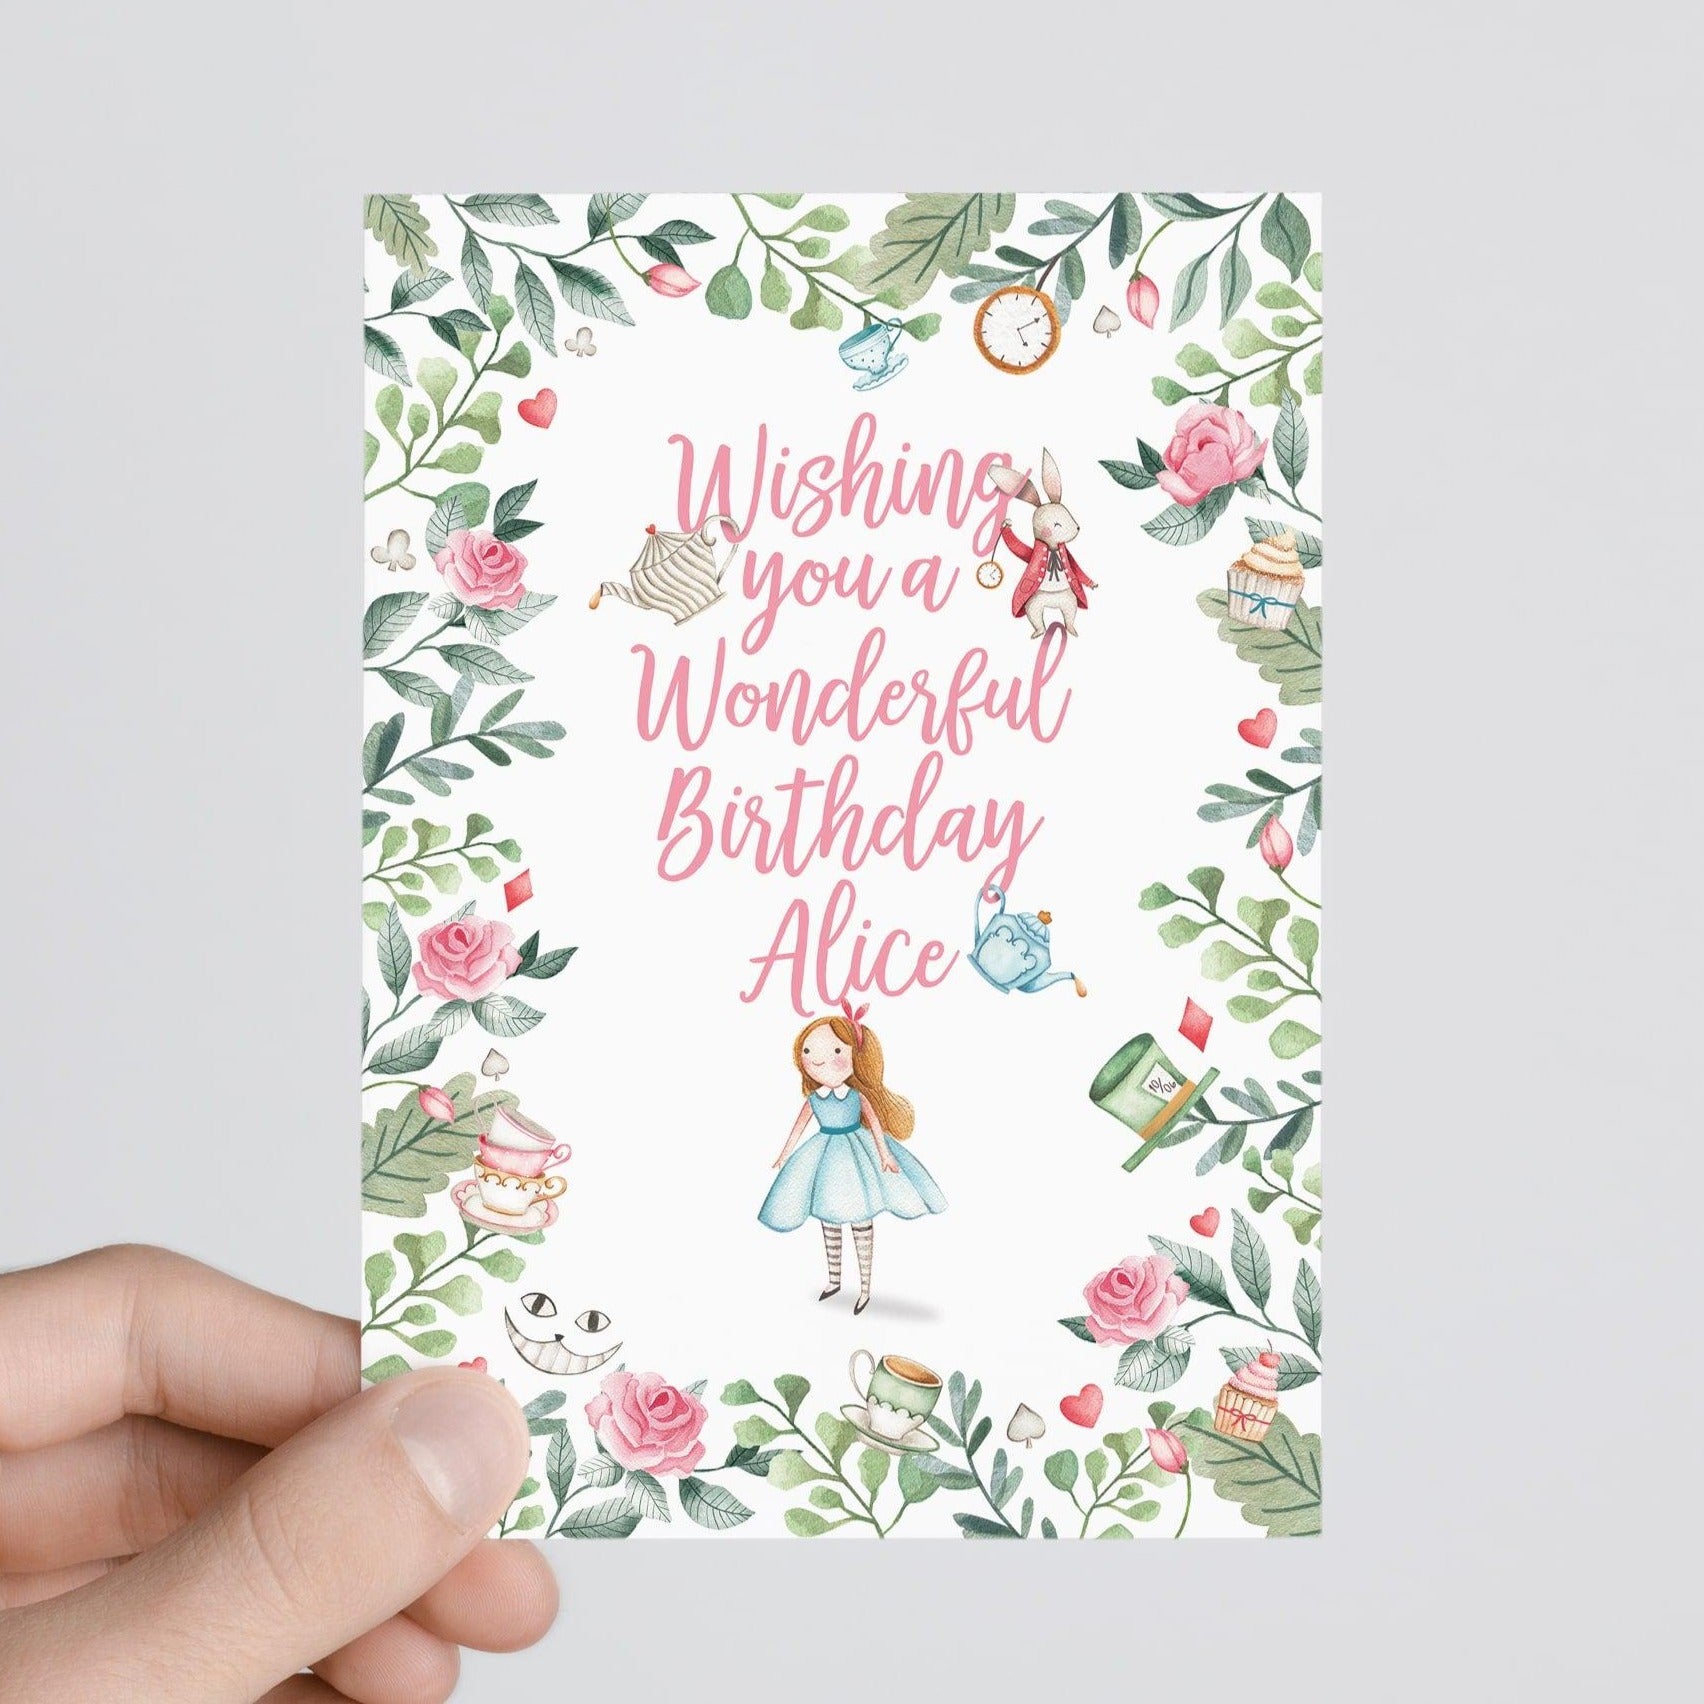 person holding Alice in wonderland personalised birthday card